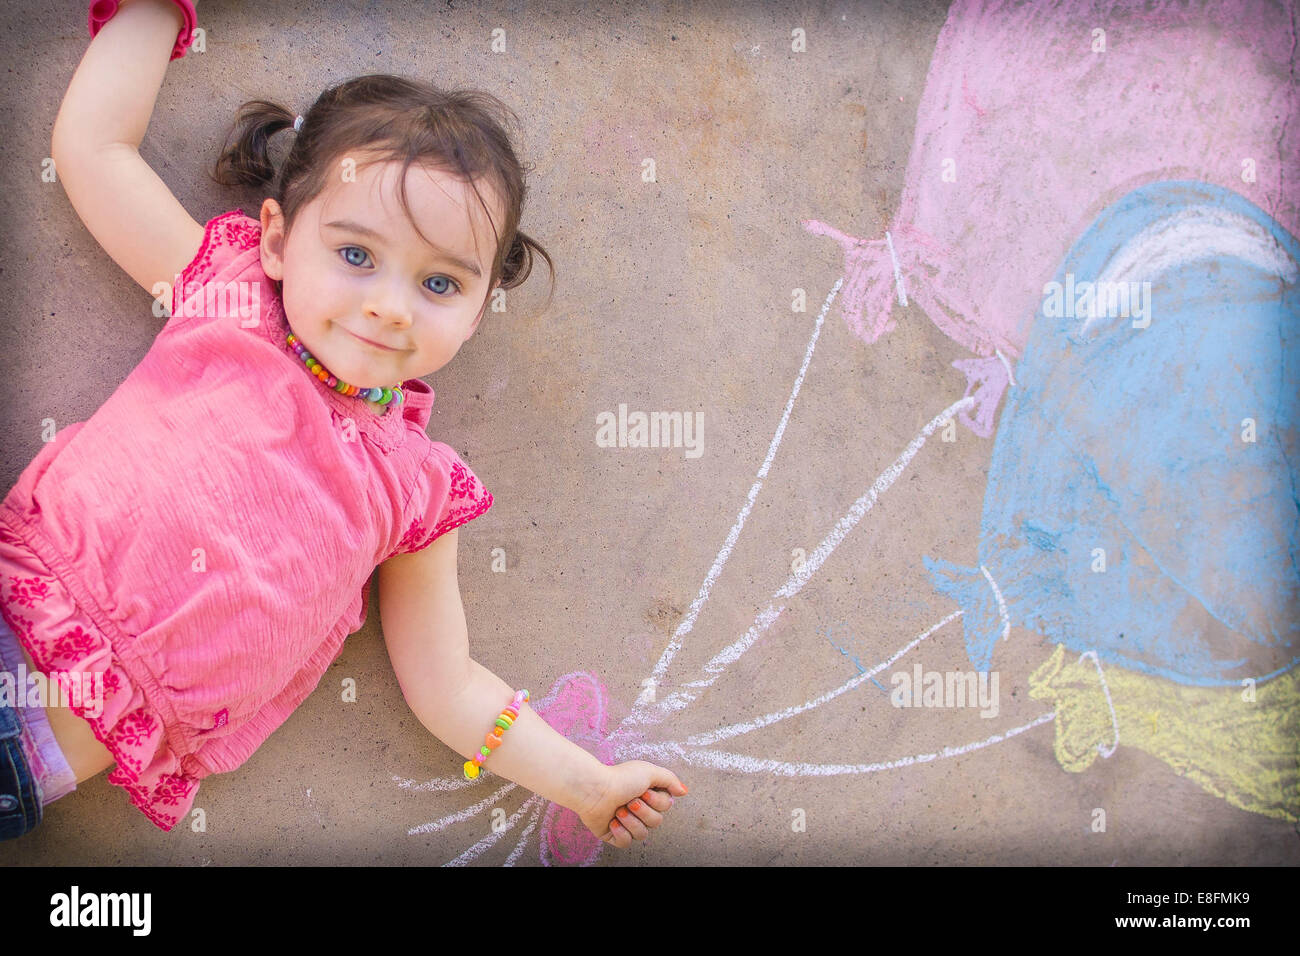 Texas, United States of America Little Girl Laying On Ground With Chalk Drawn Balloons Stock Photo